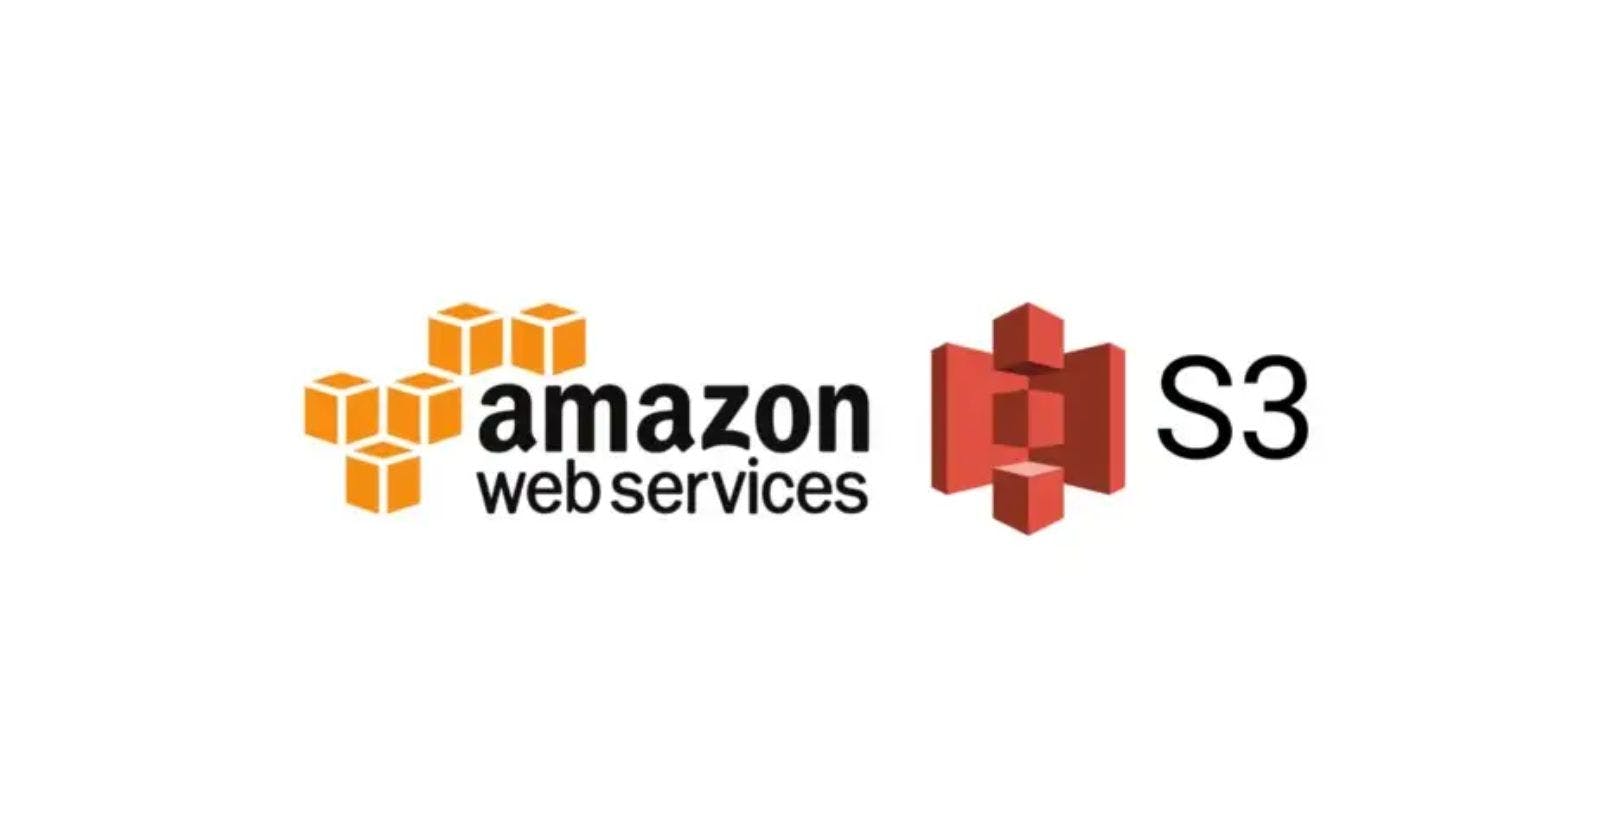 (Almost) Everything that the AWS S3 Can Do!